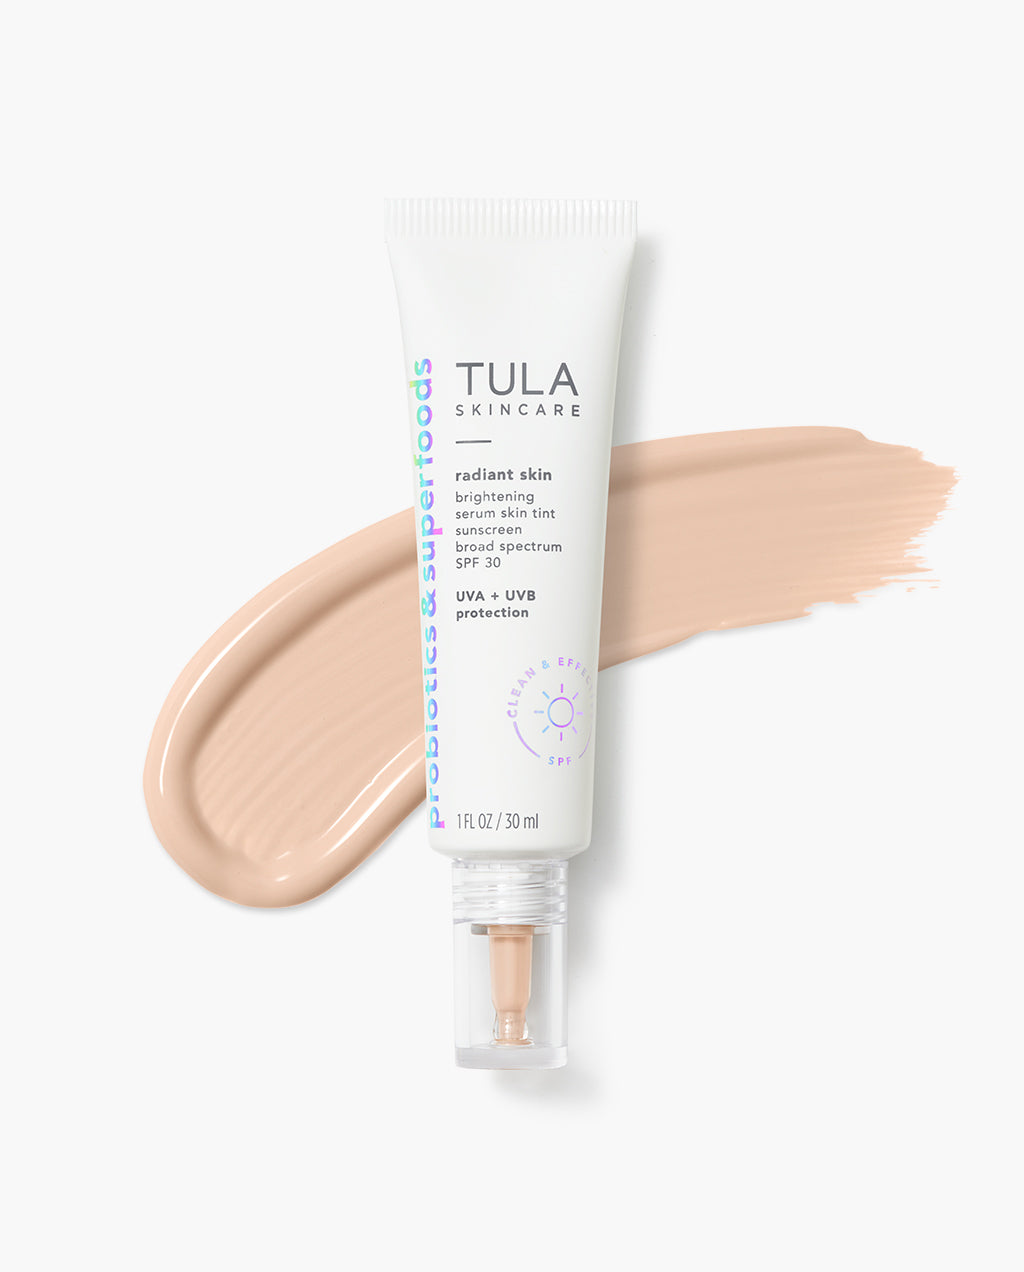 TULA Skin Care 24-7 Hydrating Day & Night Cream - Anti-Aging Moisturizer  for Face, Contains Watermelon & Blueberry Extract, 1.5 oz.